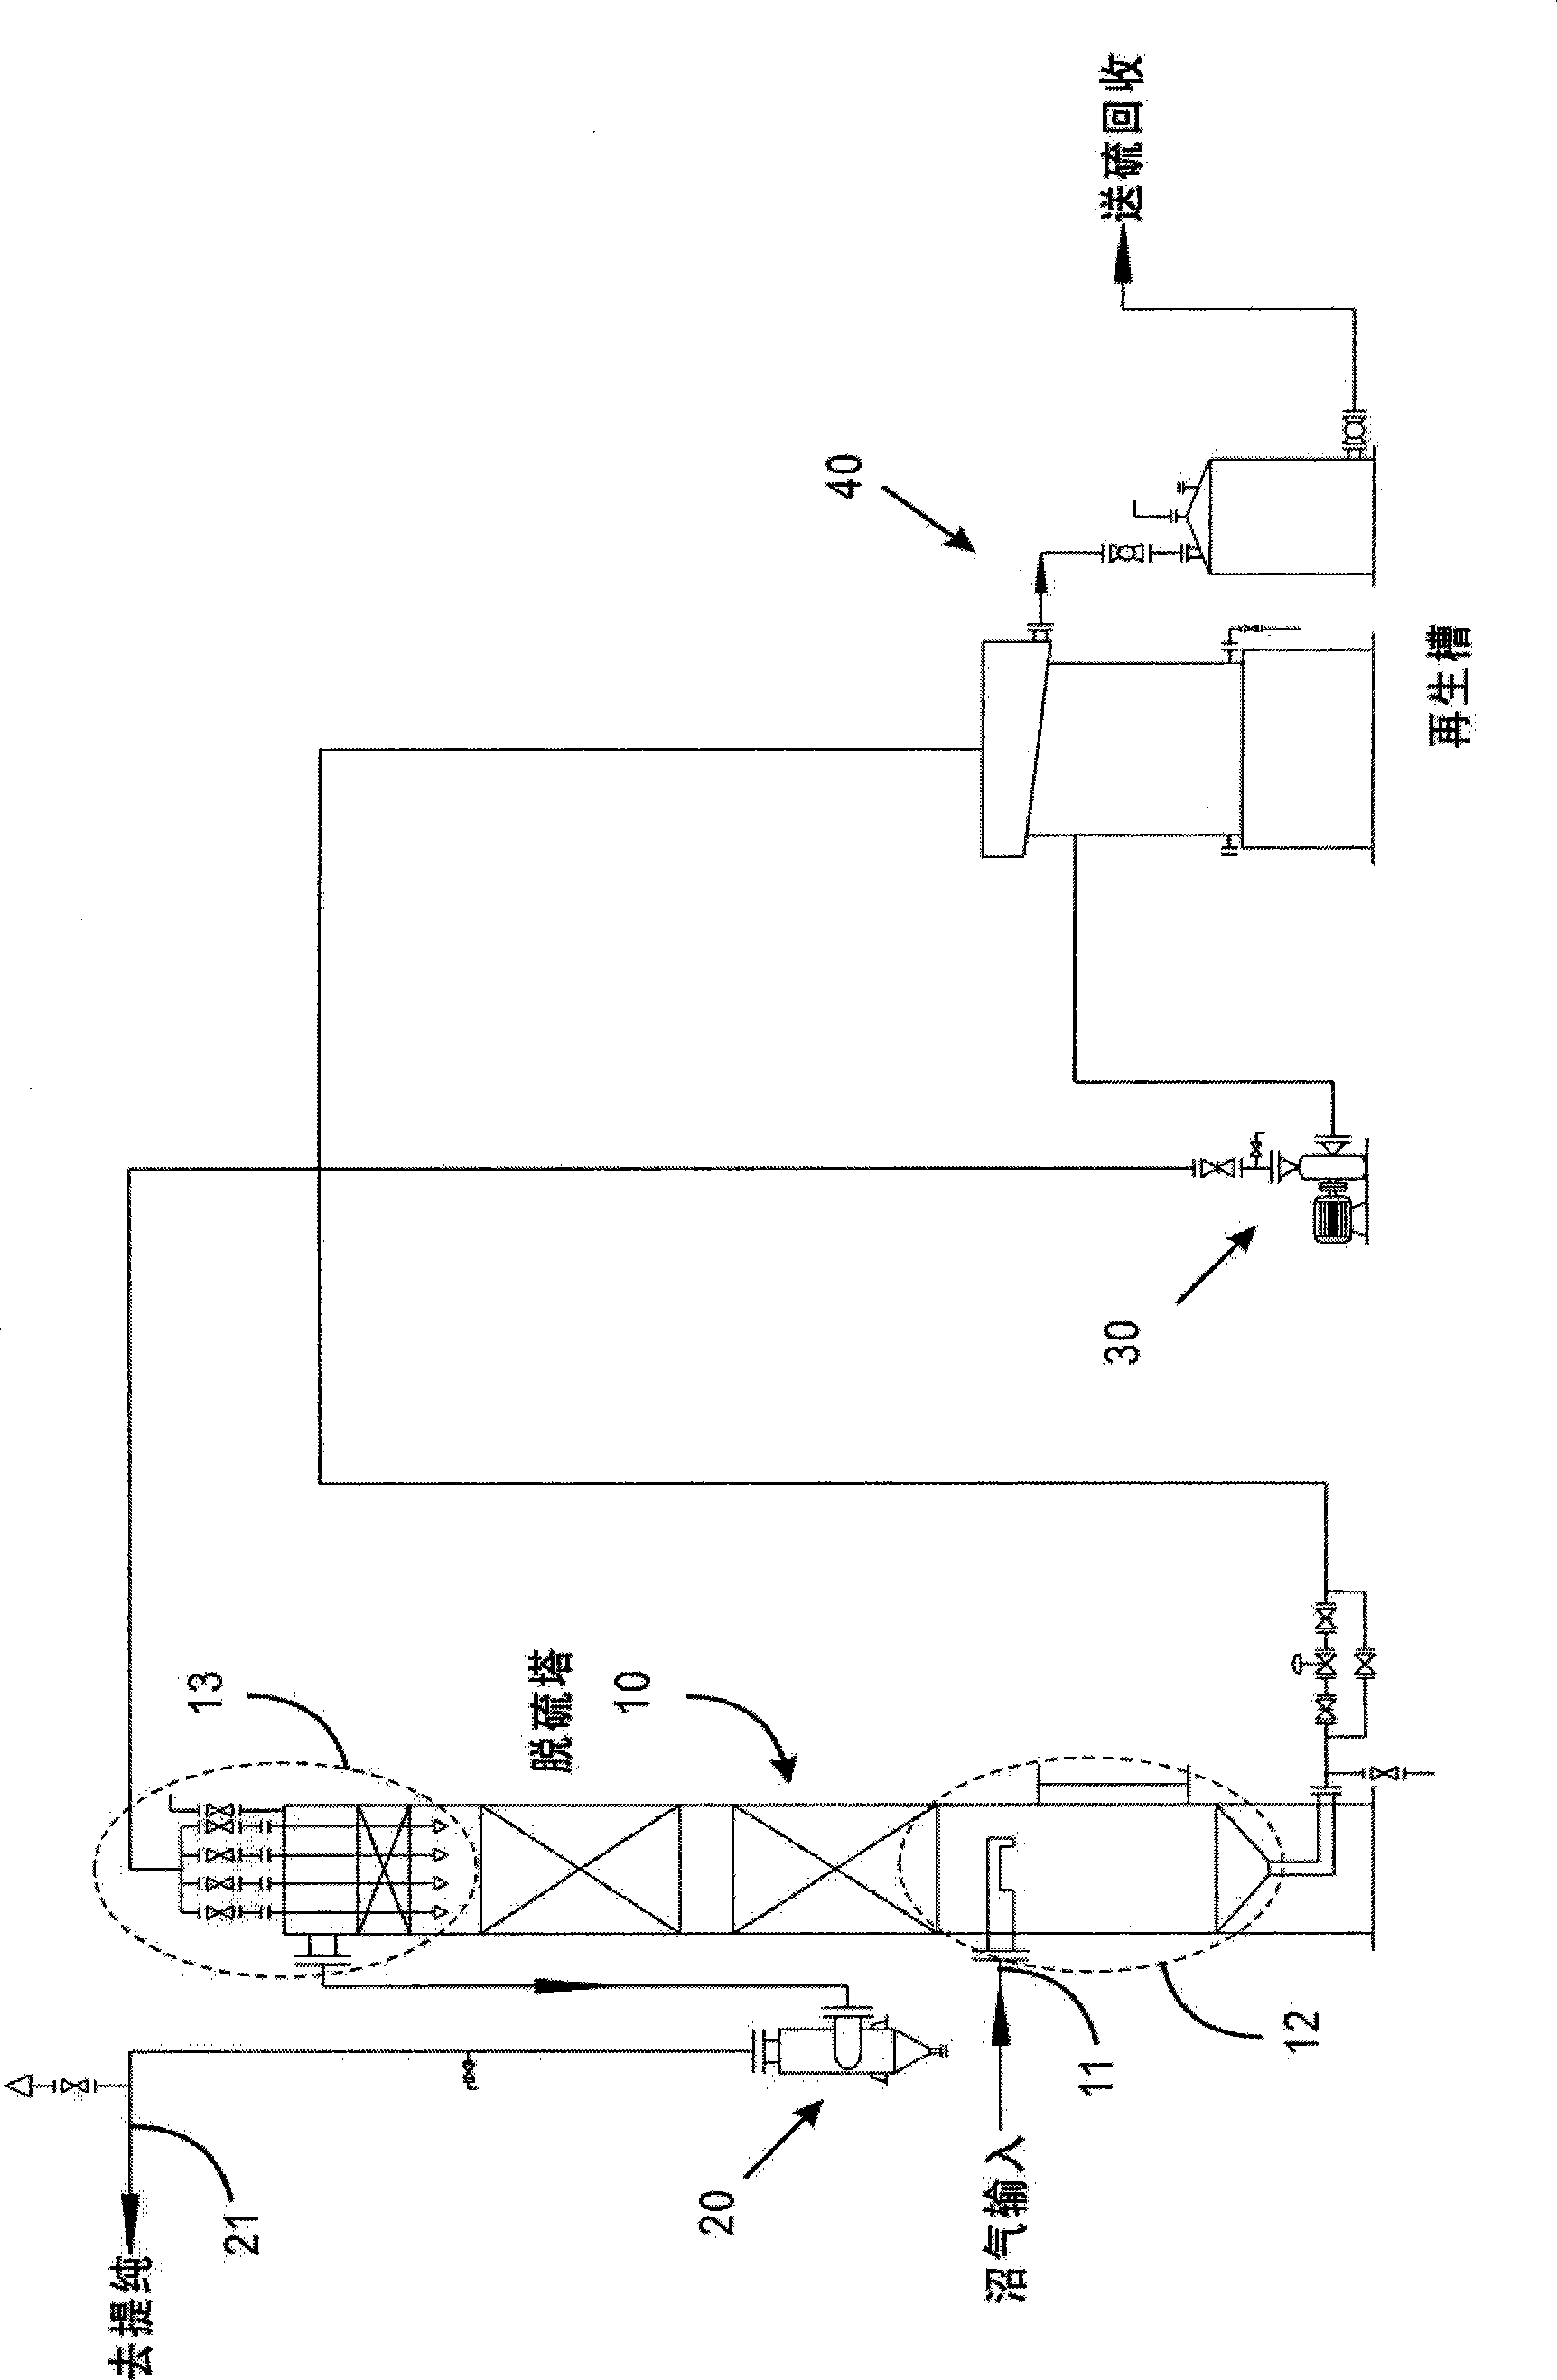 Method and apparatus for preparing sulfur-free natural gas from methane